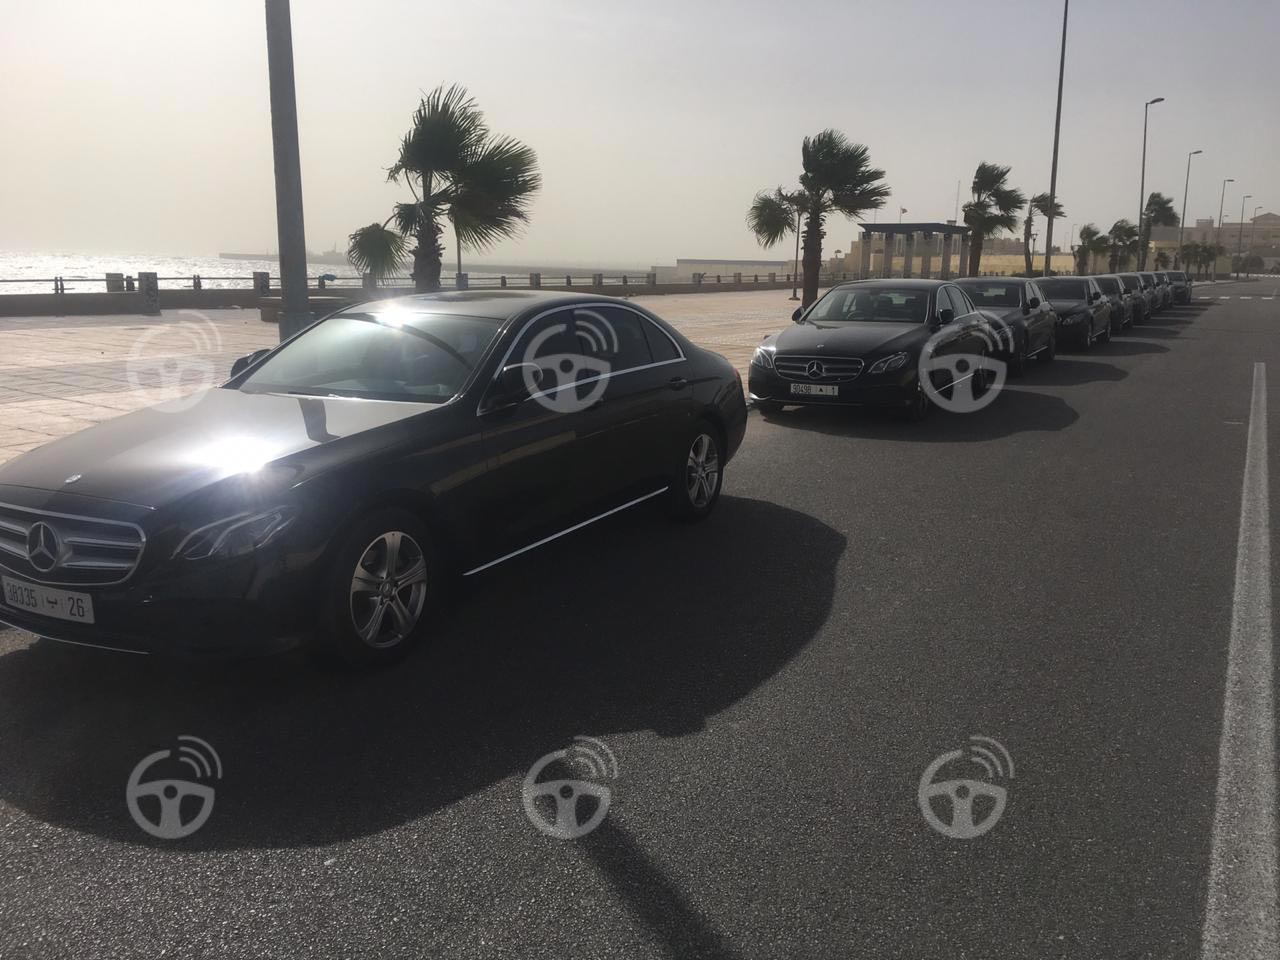 Mercedes S class for wedding guests